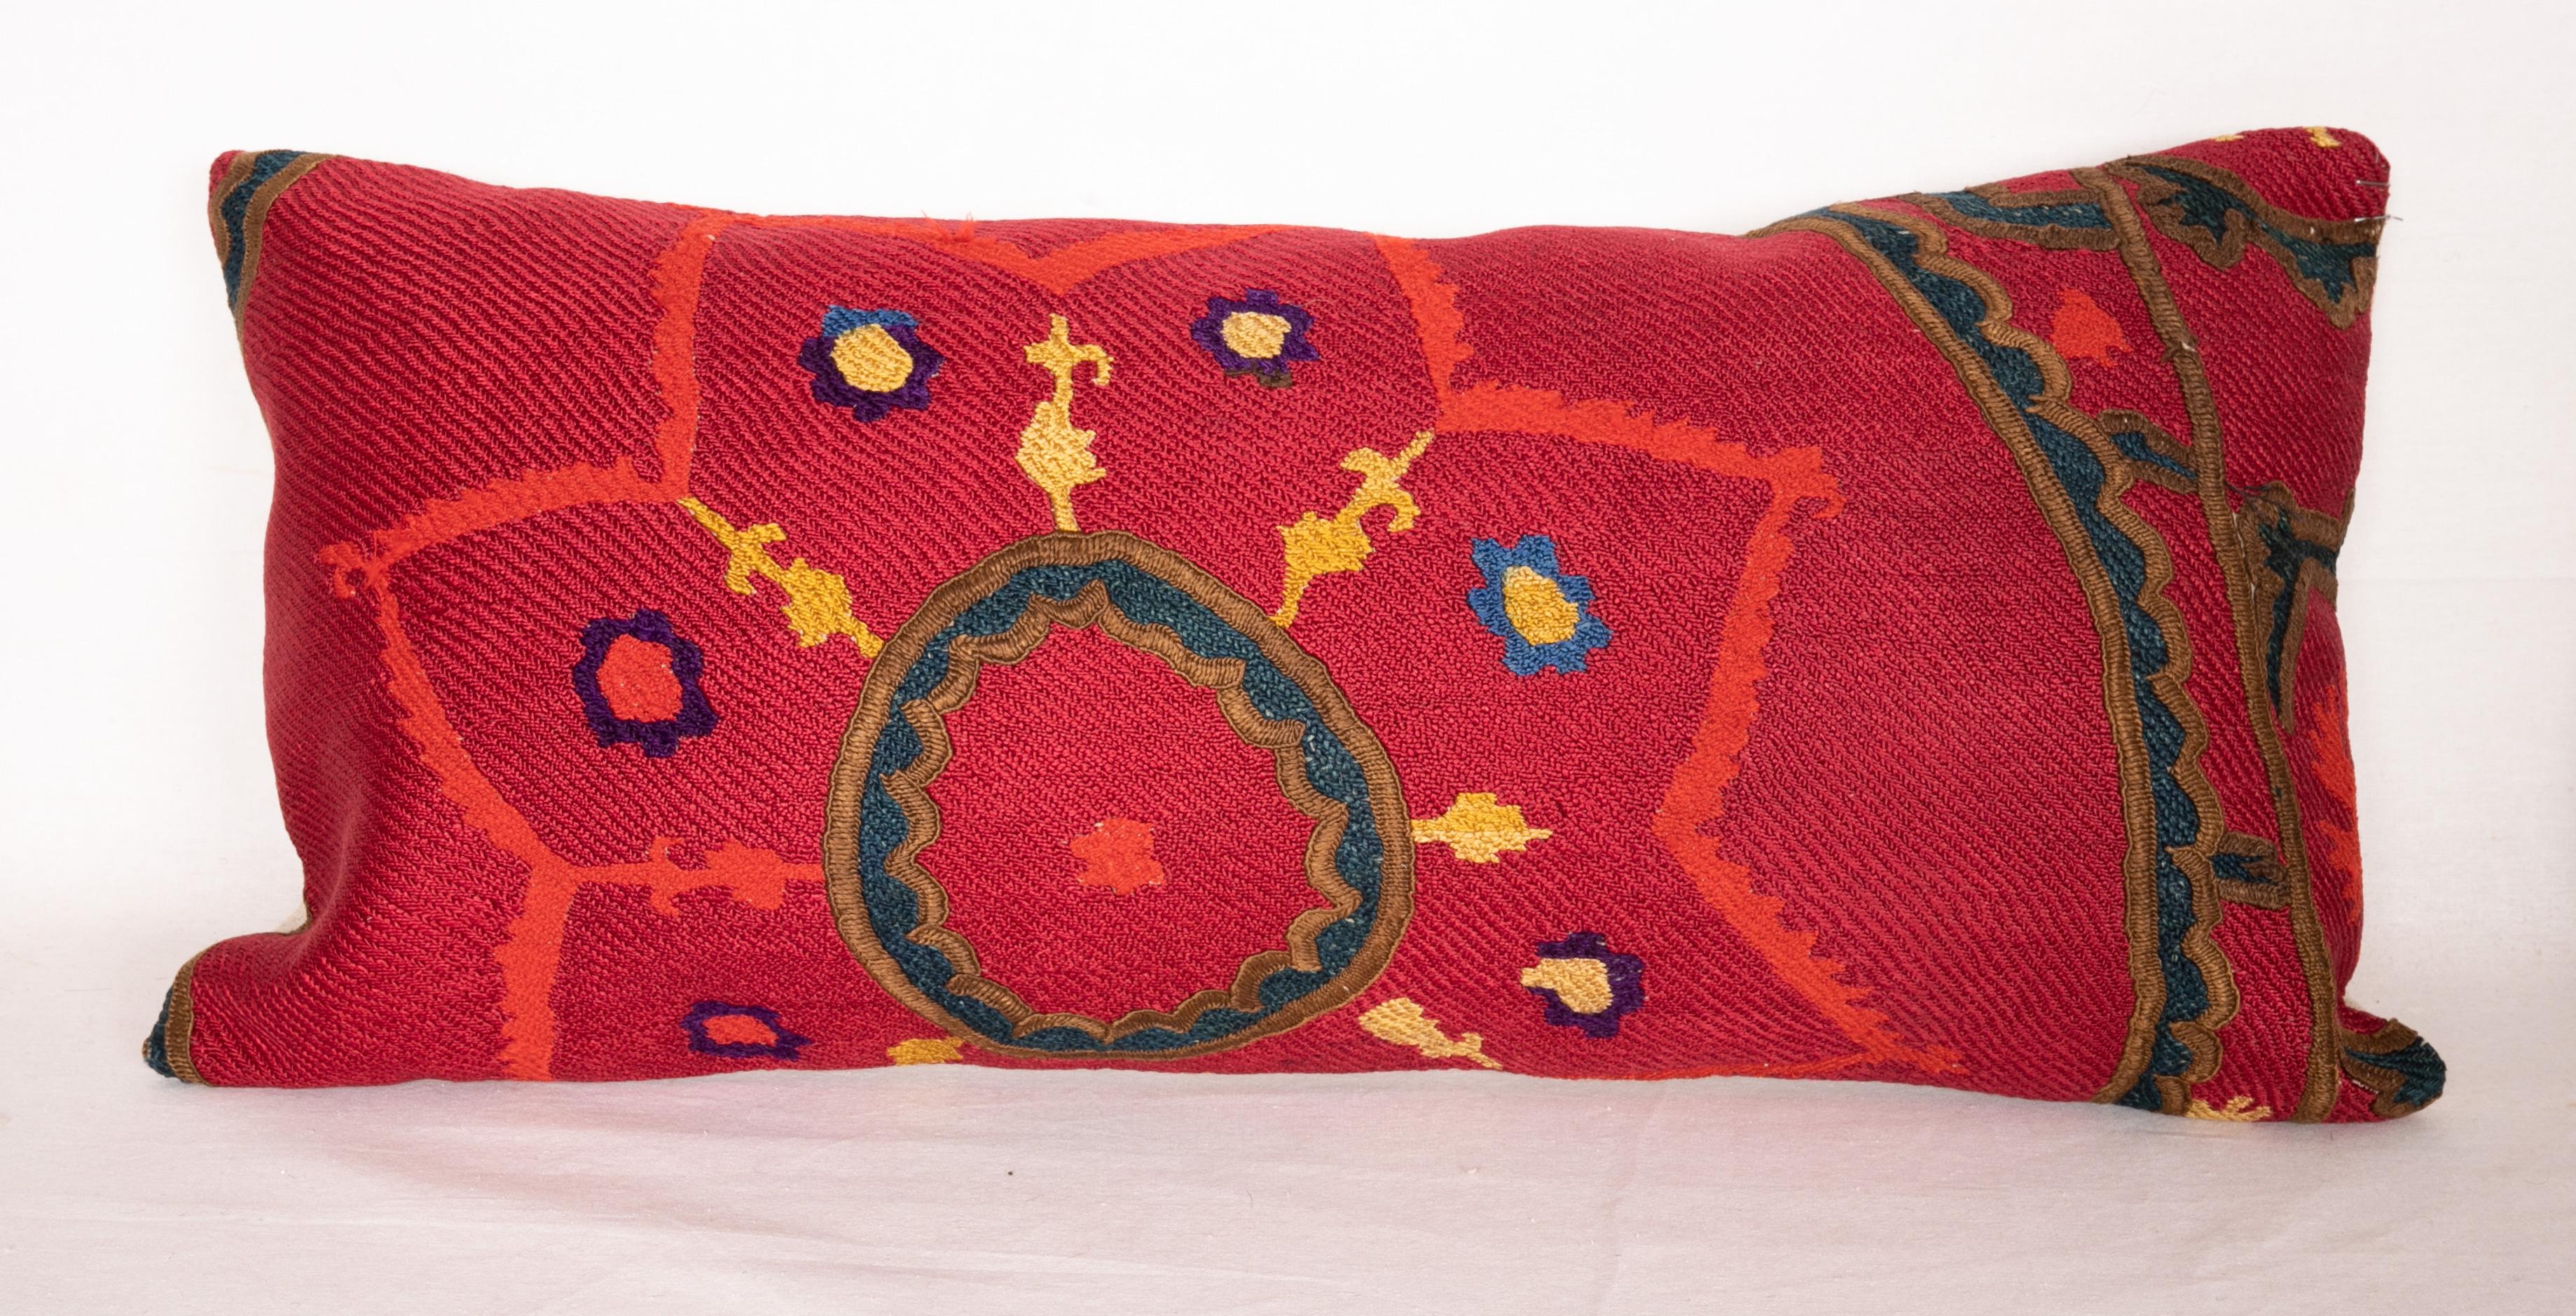 Embroidered Antique Suzani Pillows Made from a 19th Century Tashkent Suzani For Sale